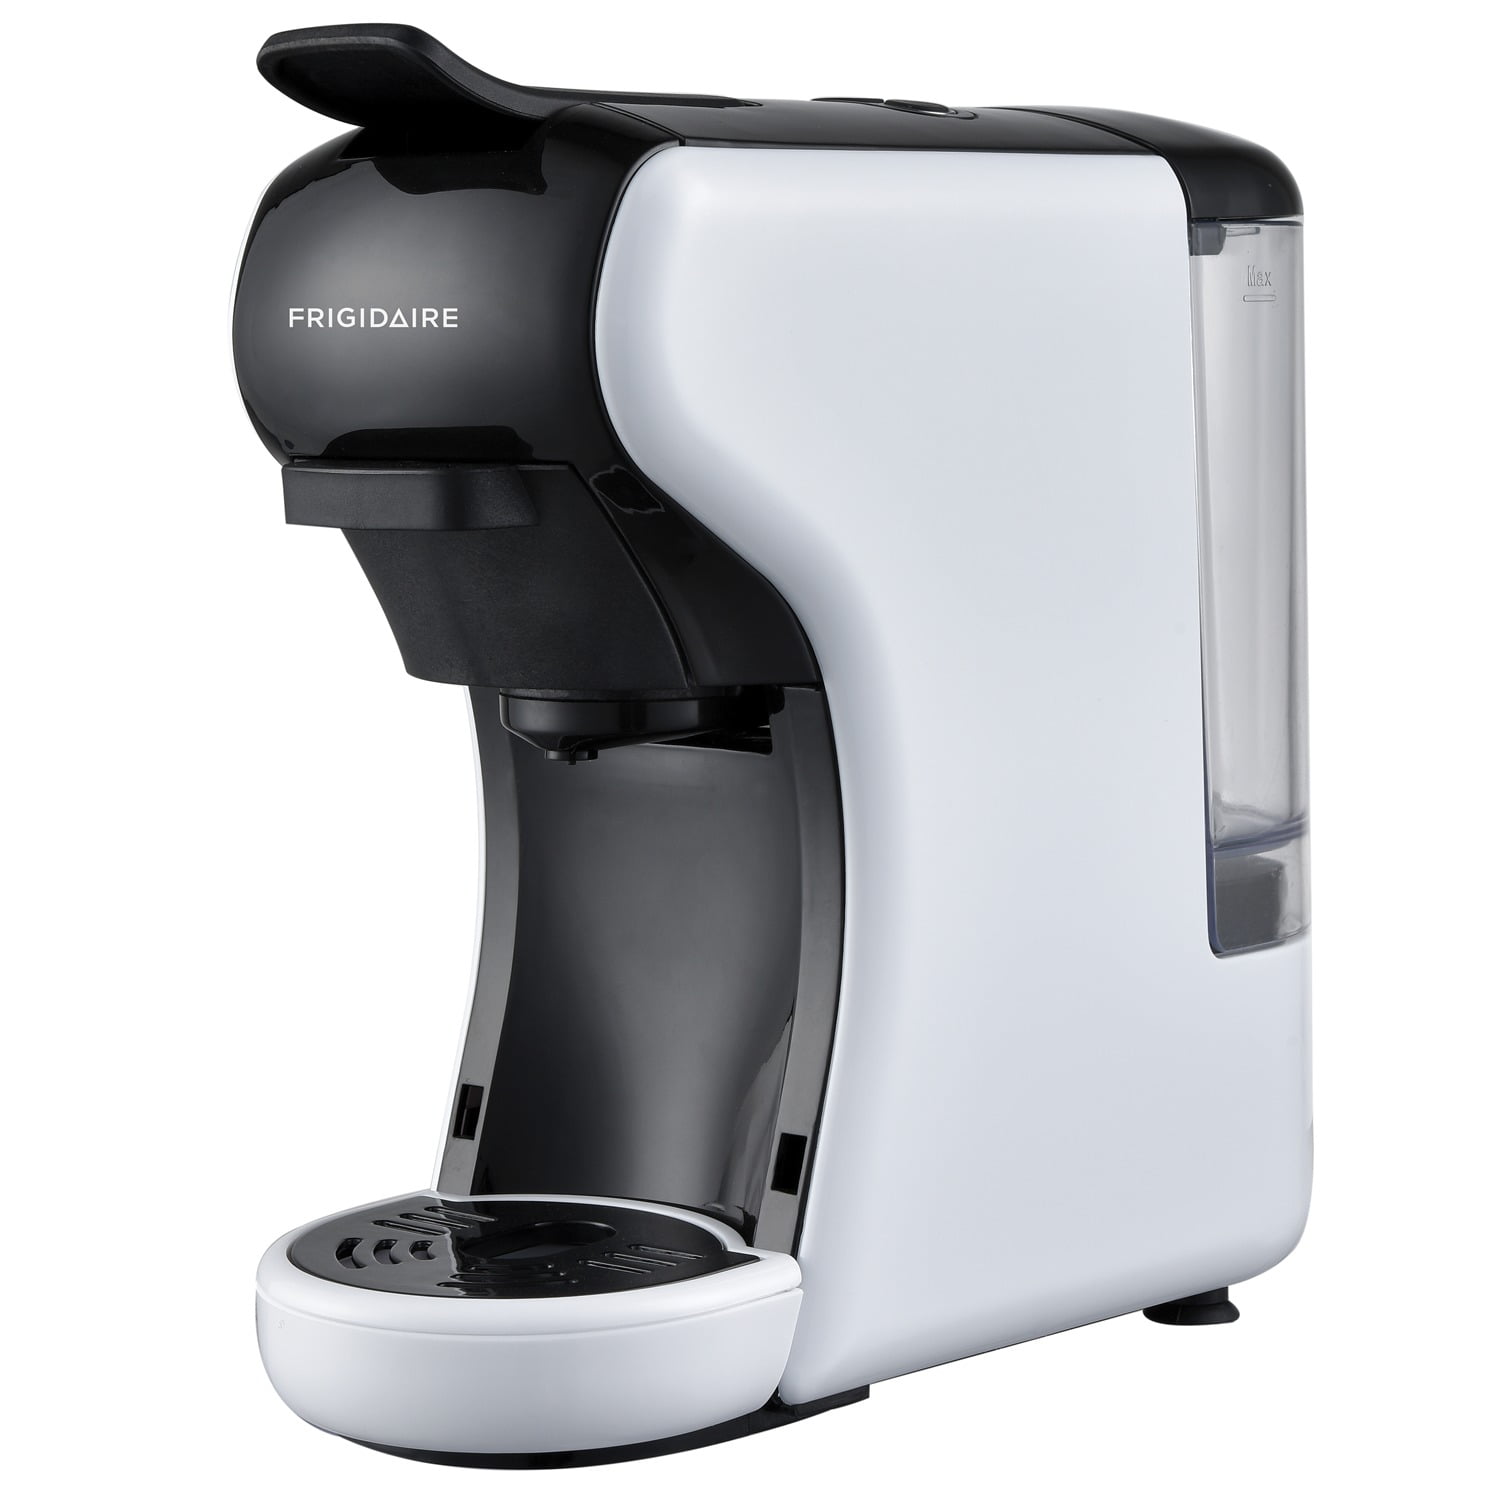 FIRST OF ITS KIND! X'PRESSIO Multi-Capsules Coffee Machine FOR 7 TYPES 